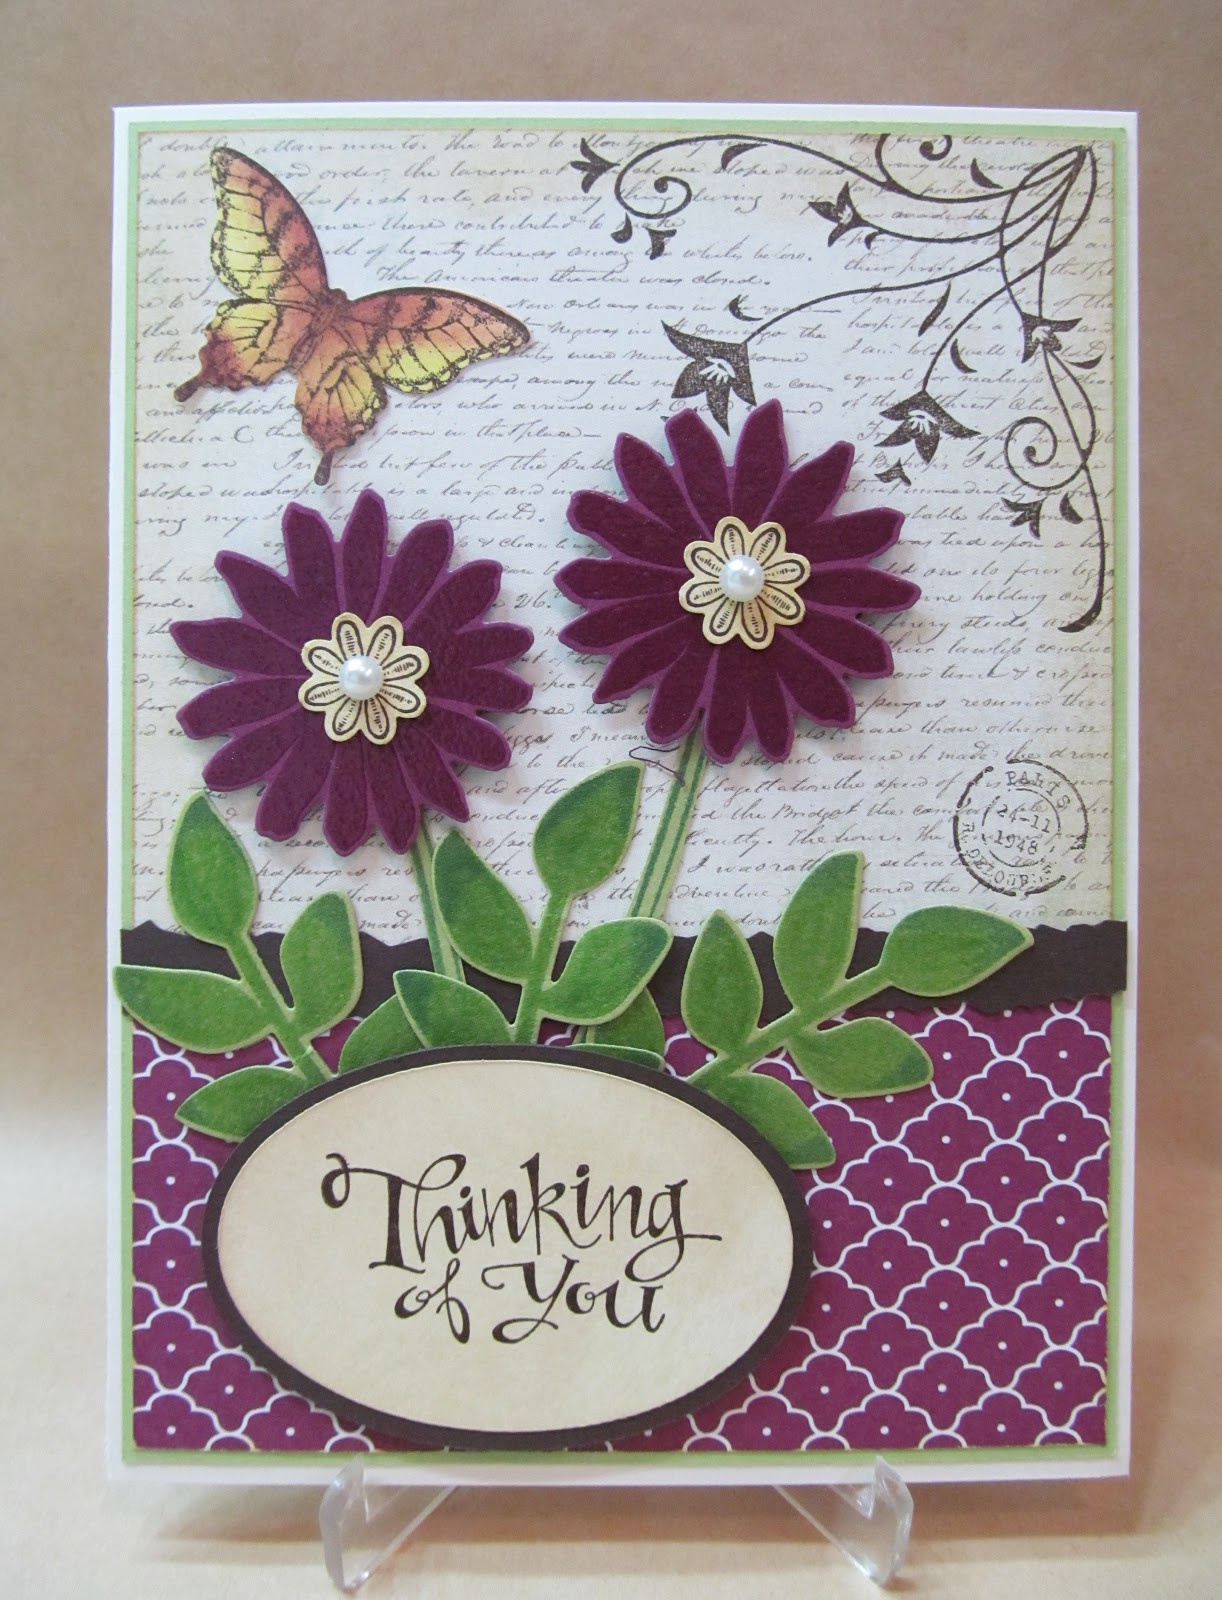 savvy-handmade-cards-thinking-of-you-card